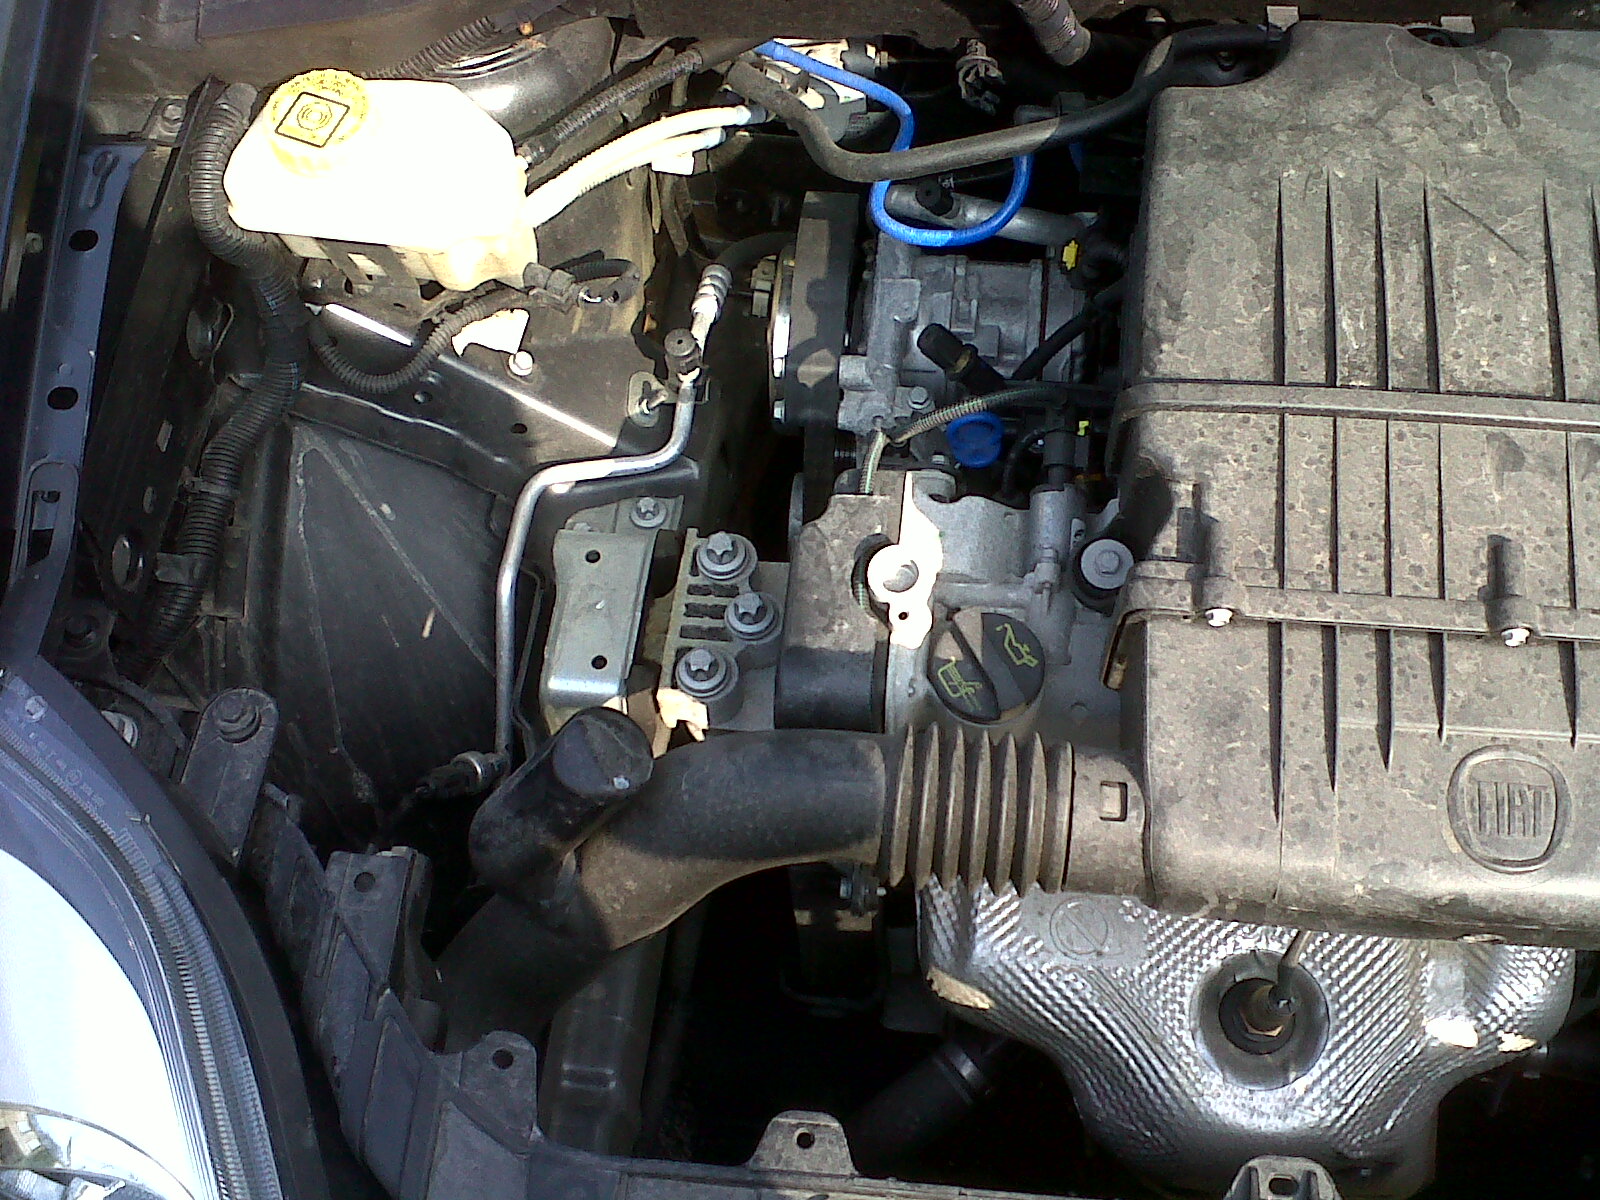 Space in the engine compartment.